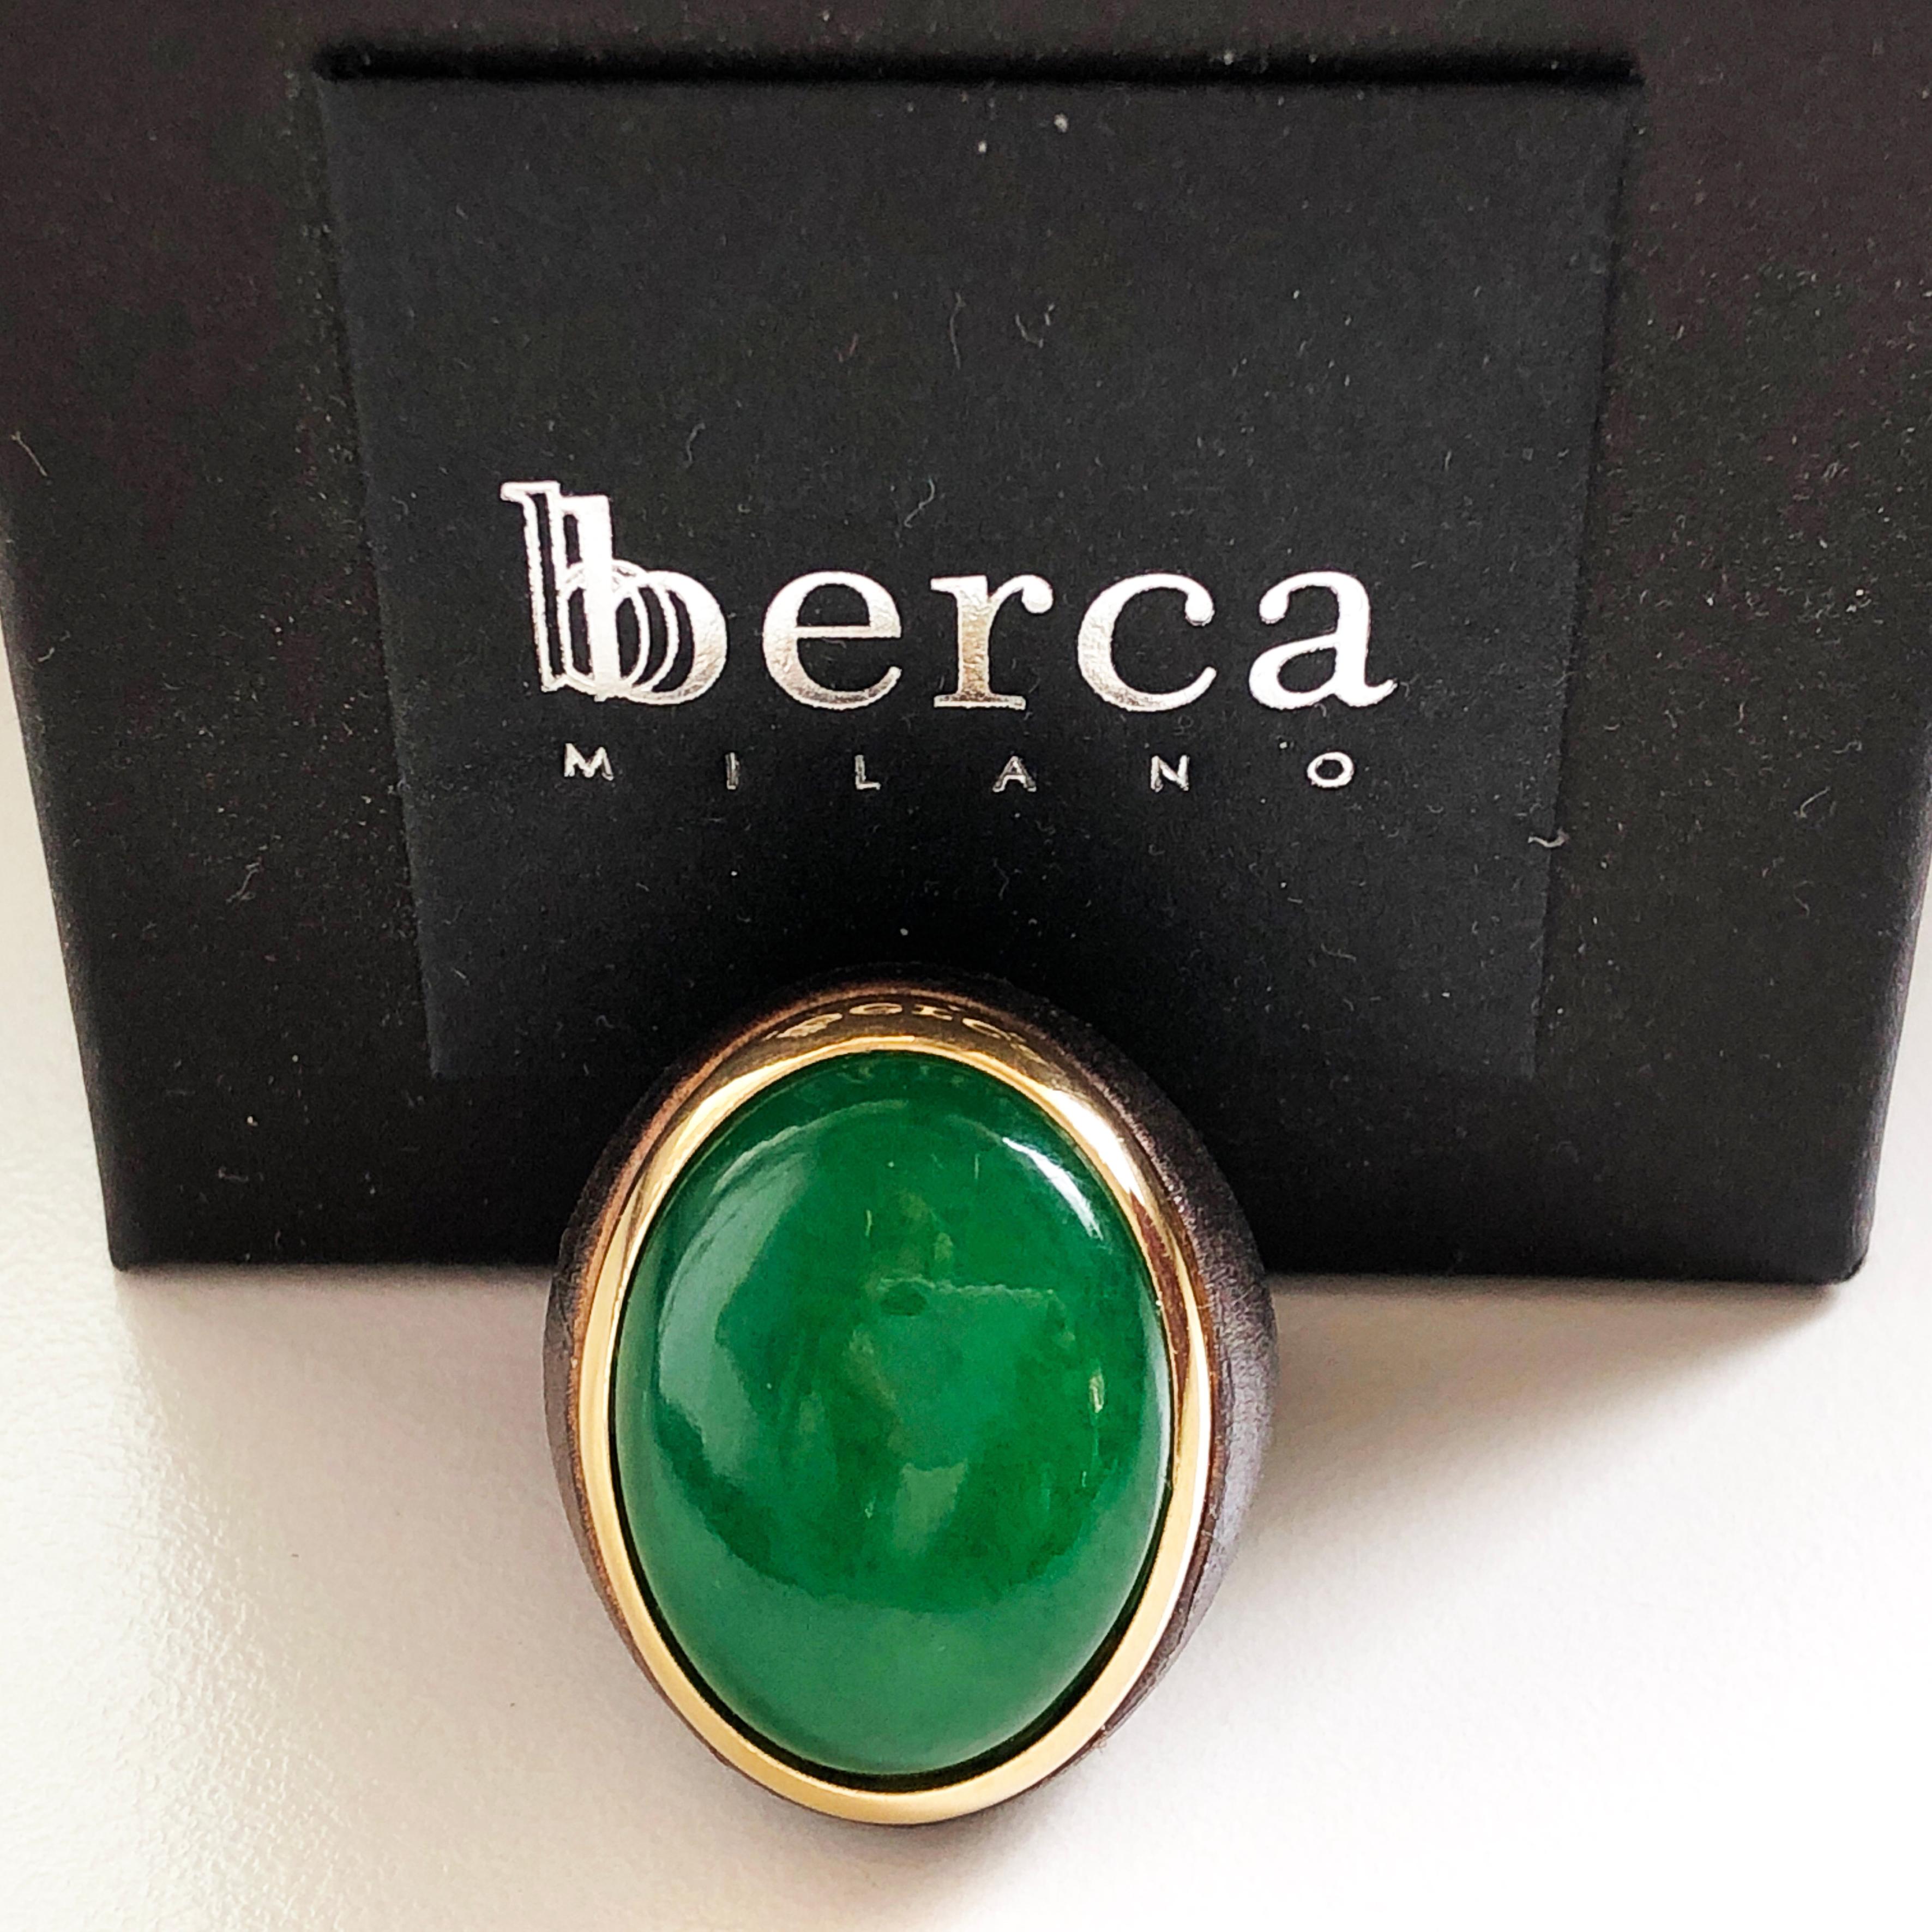 Berca One-of-a-Kind 22Kt Natural Green Jade Oxidized Brass Gold Cocktail Ring 4